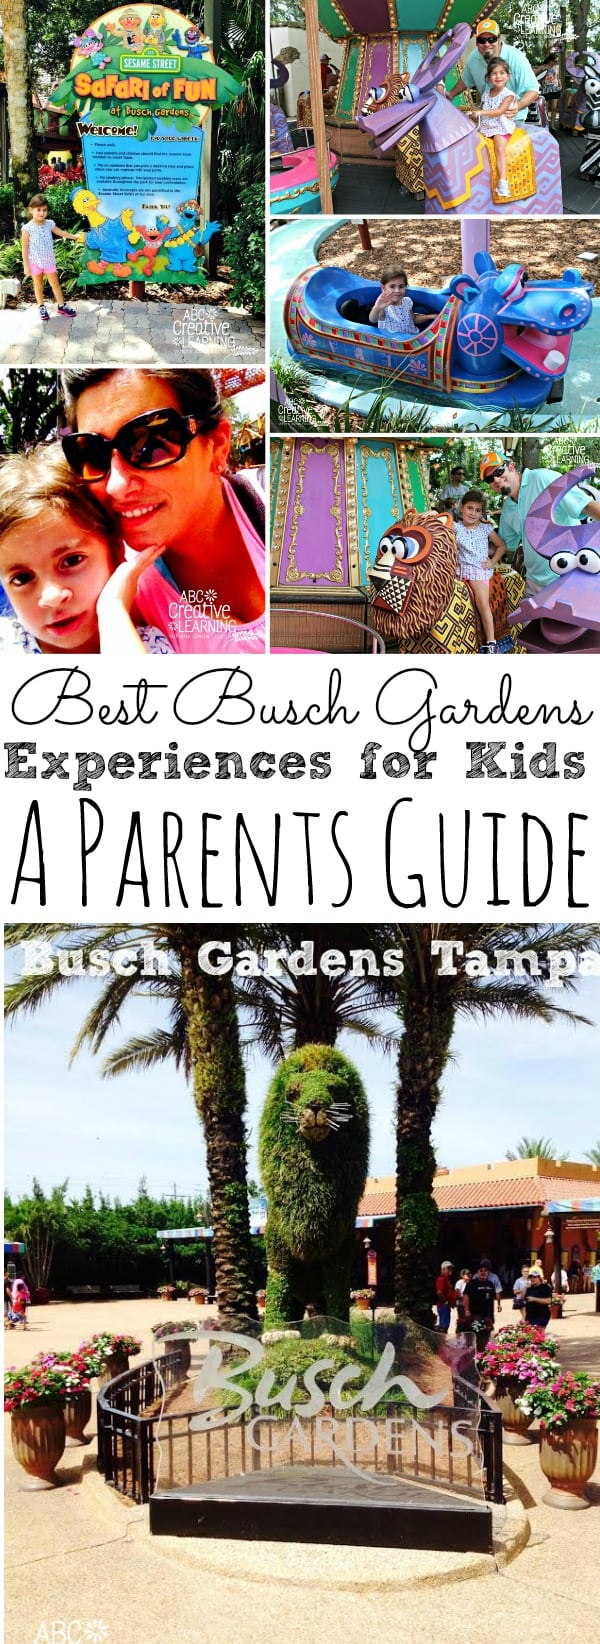 Best Busch Gardens Tampa Bay Experiences For Kids | A Parents Guide - simplytodaylife.com